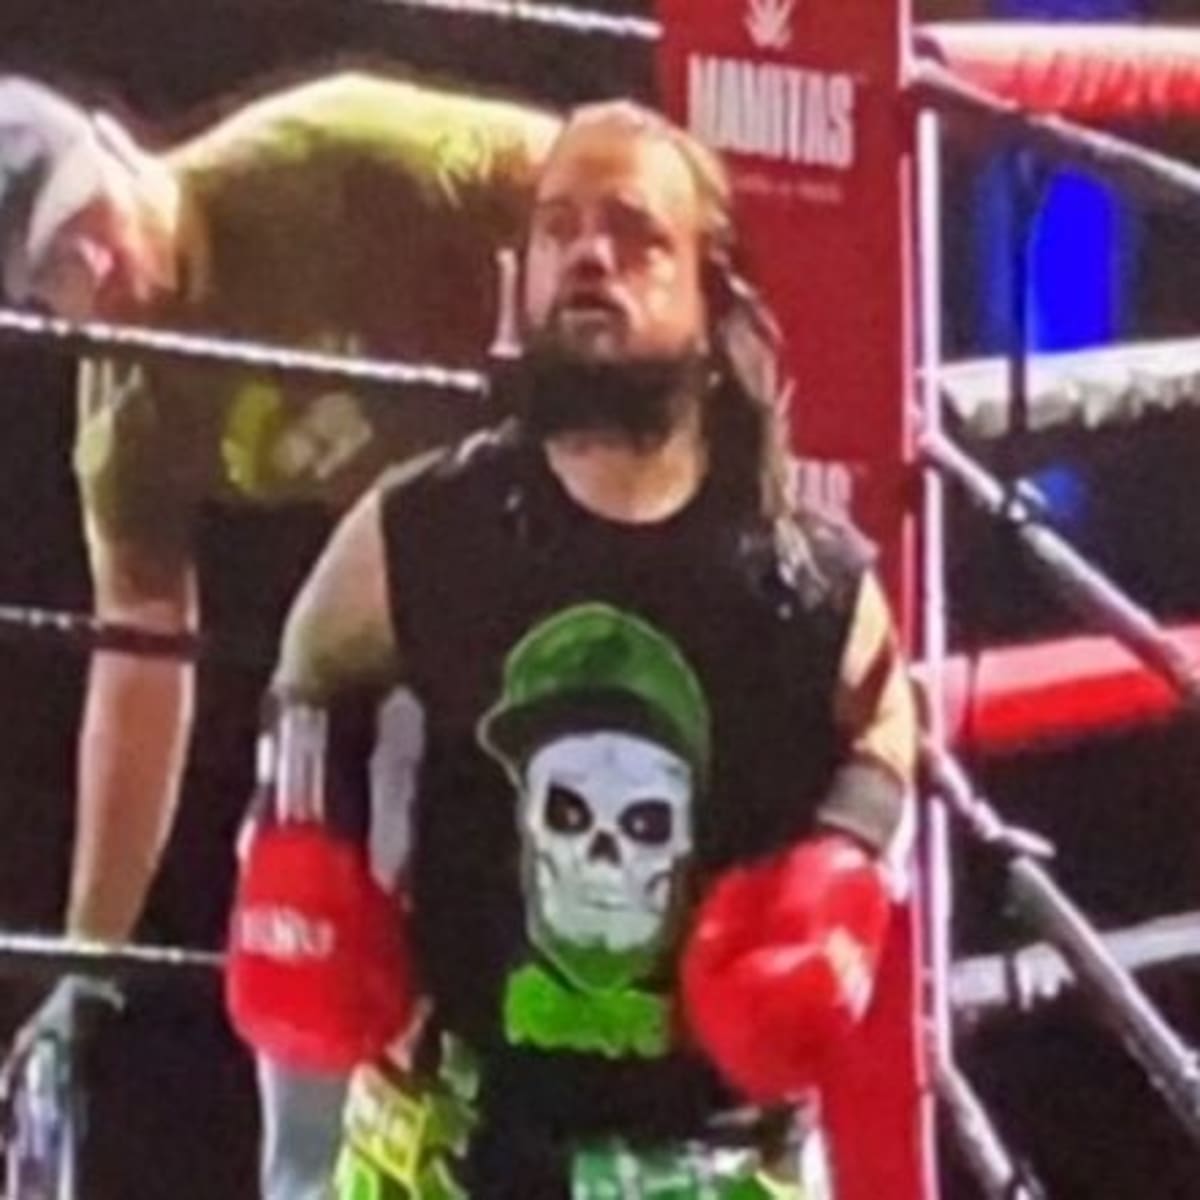 Swoggle loses his boxing debut at Rough N Rowdy event - Wrestling News